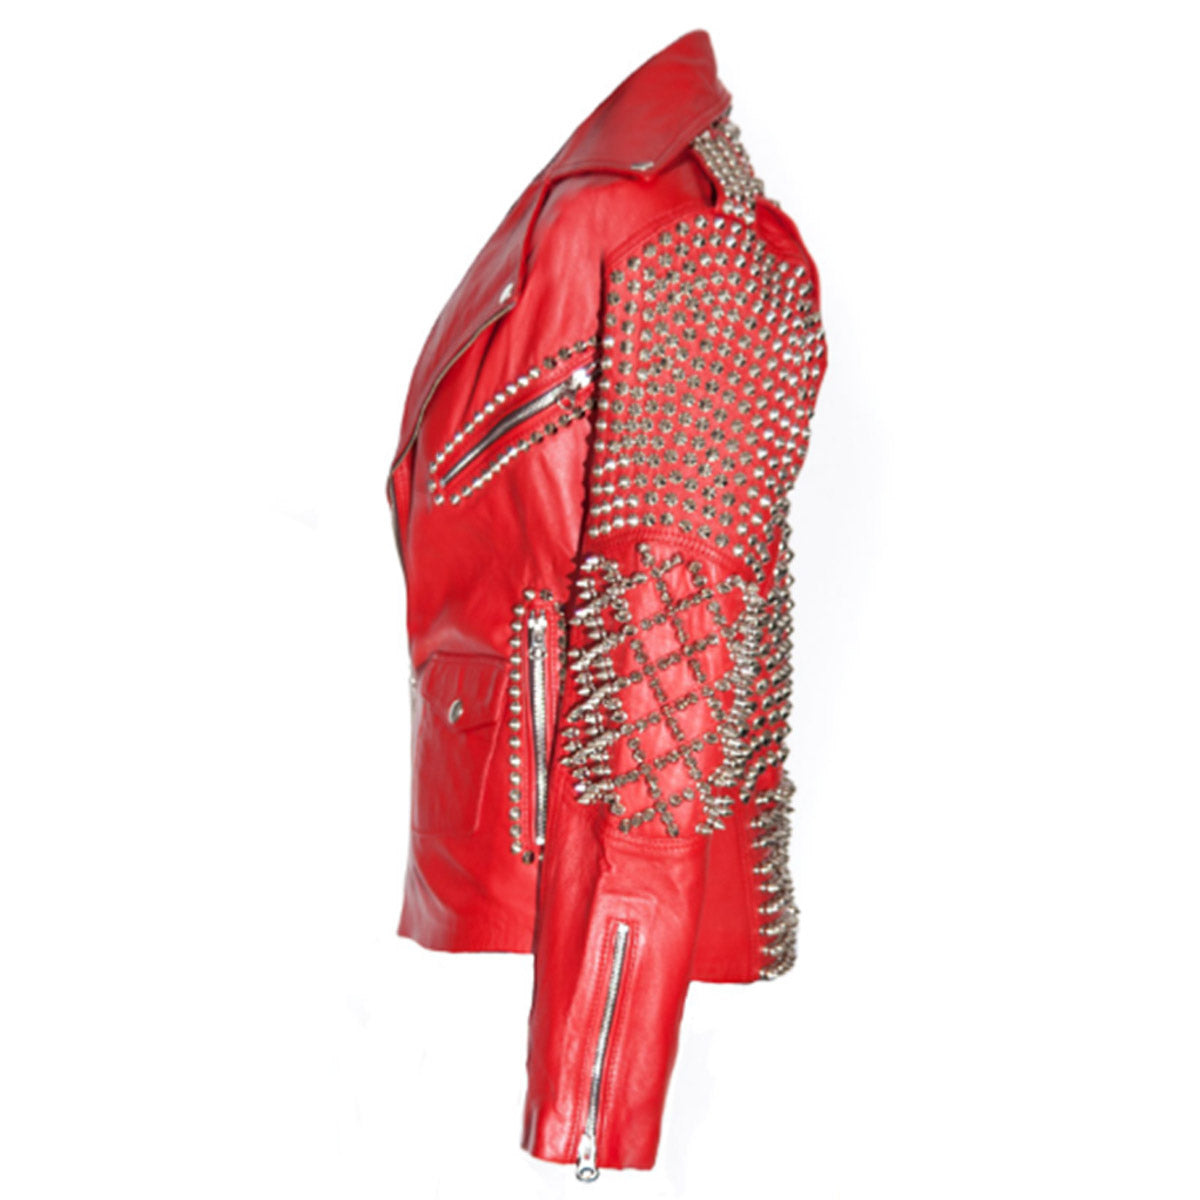 Punk Rock Star Spikey Studs Red Leather Jacket